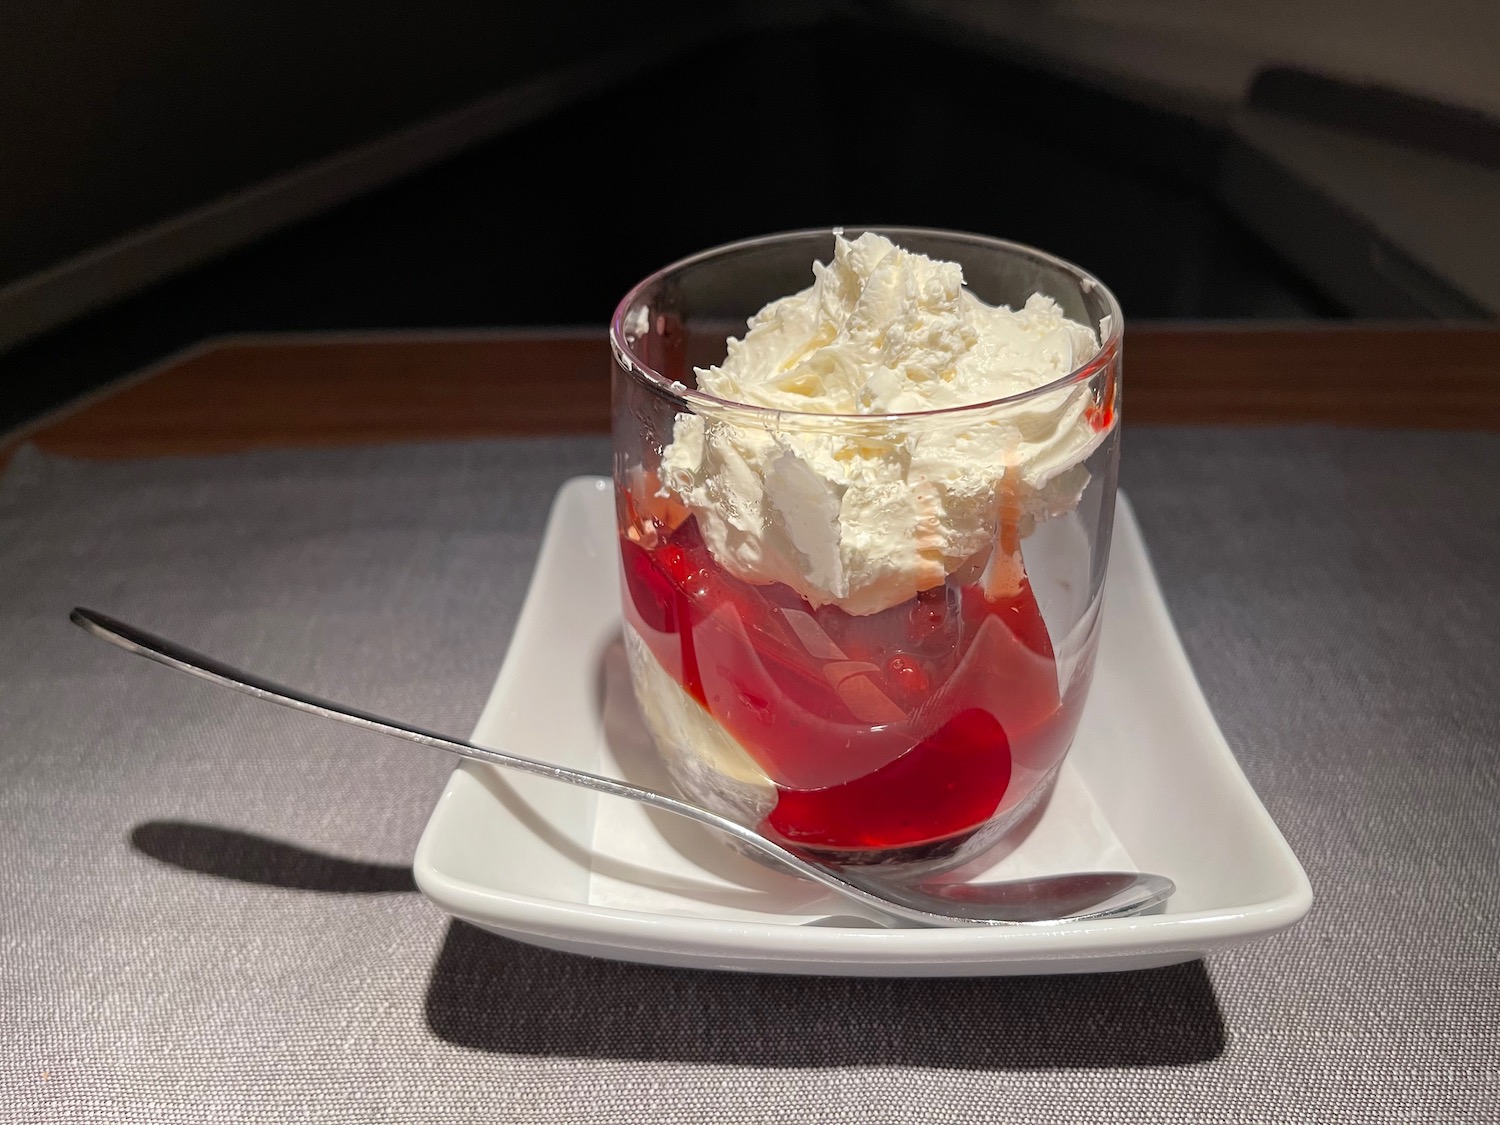 a dessert in a glass with whipped cream and a spoon